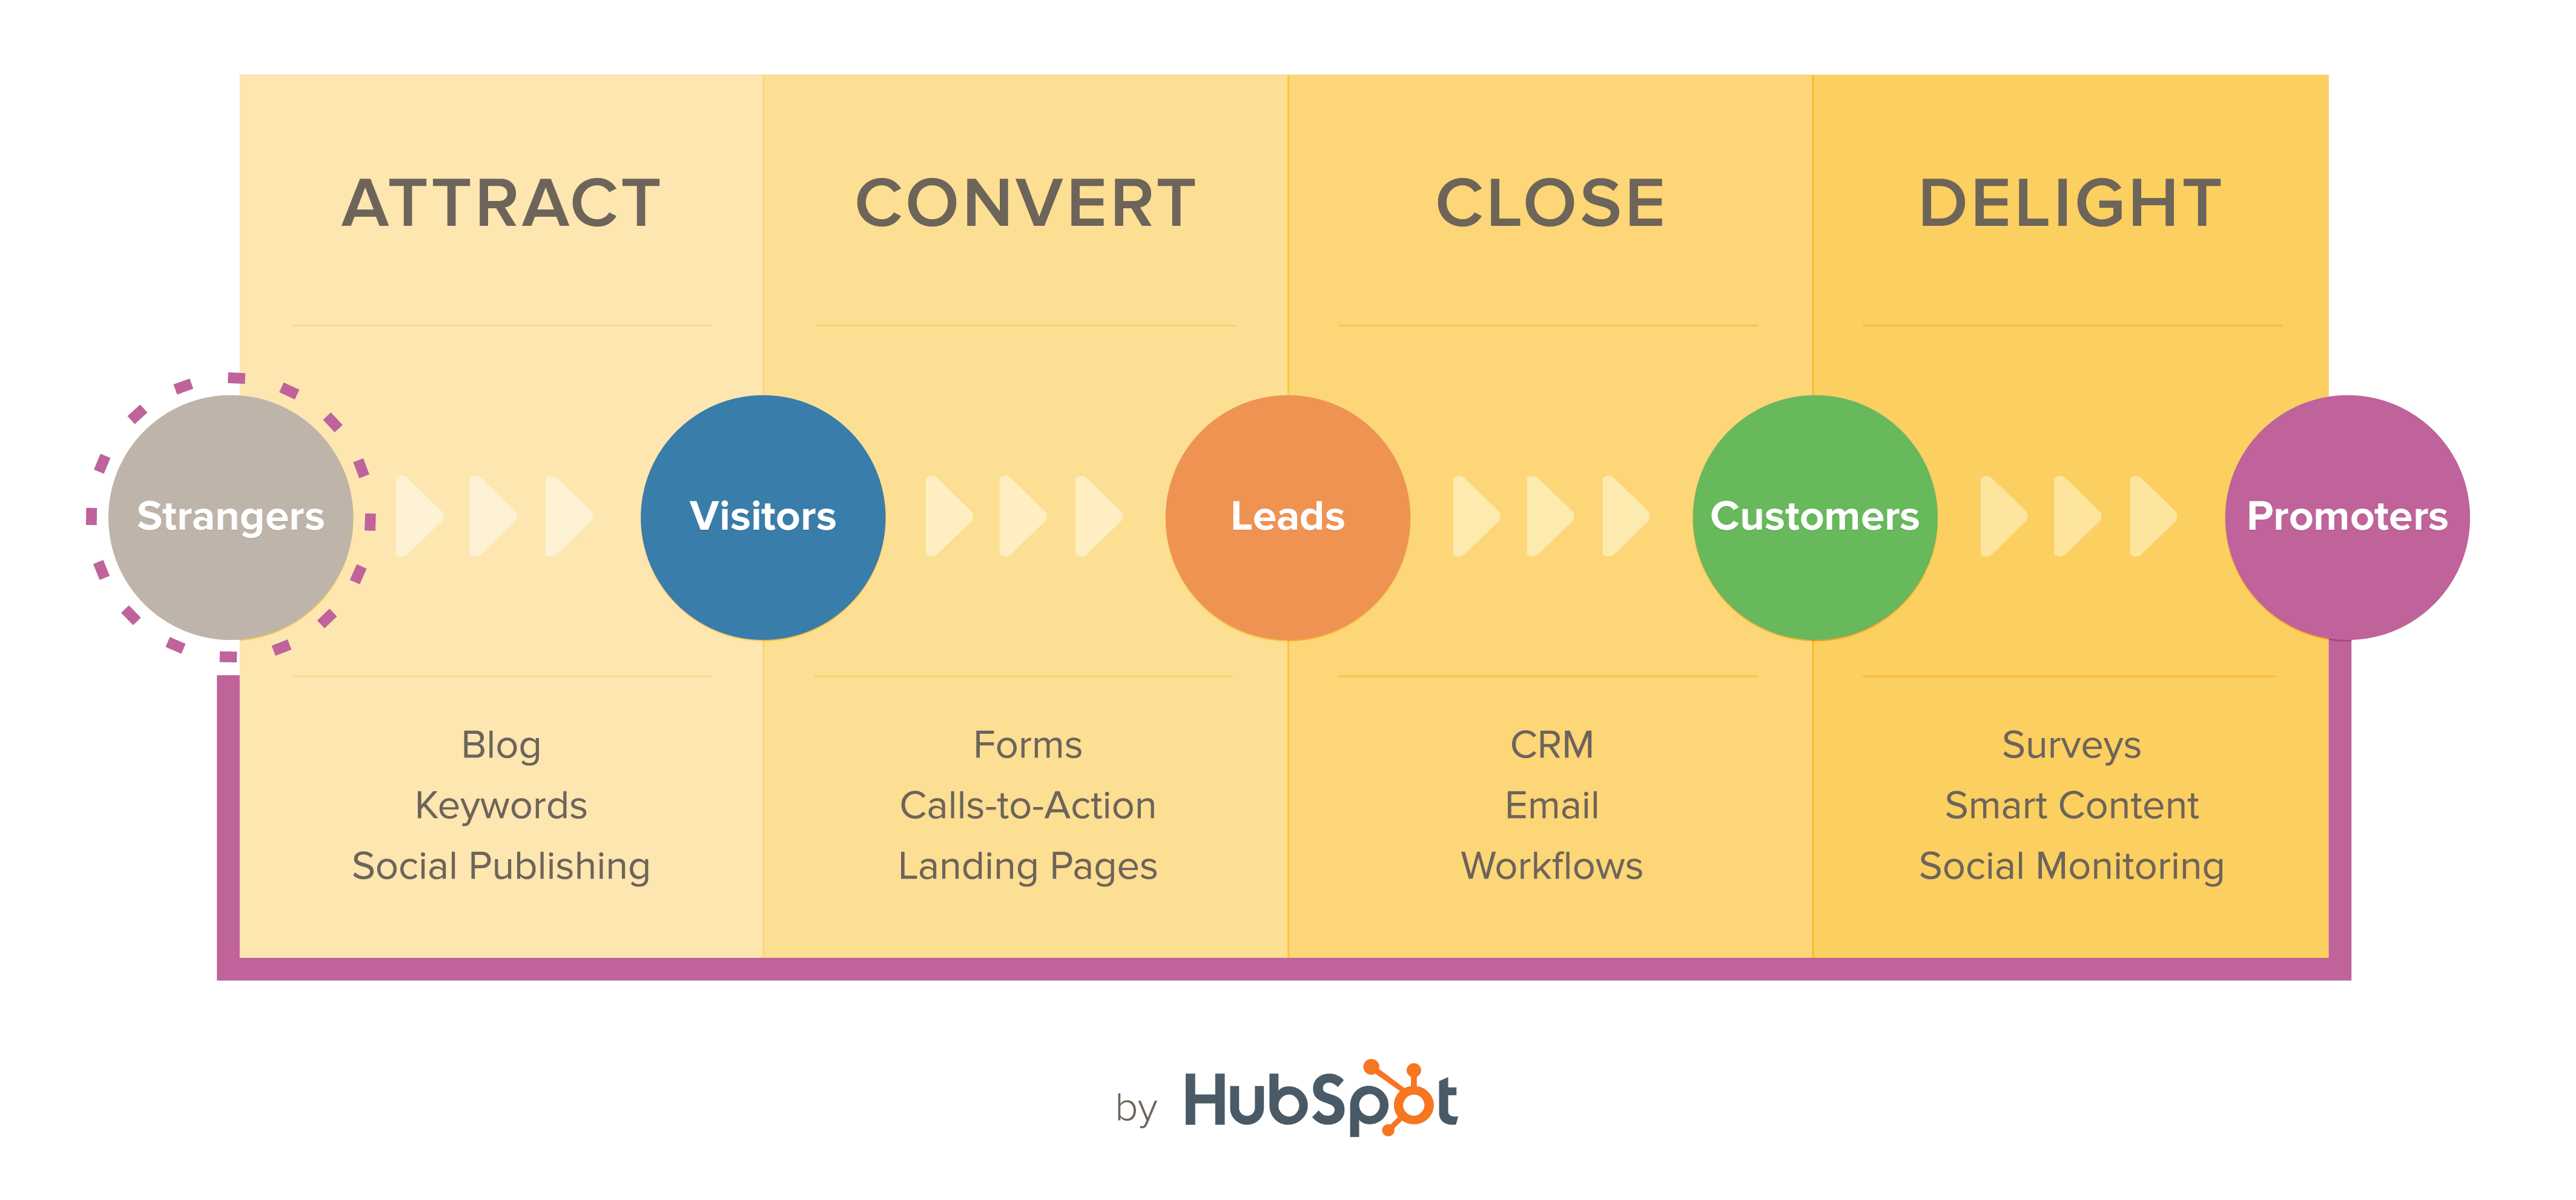 hubspot-accd-image